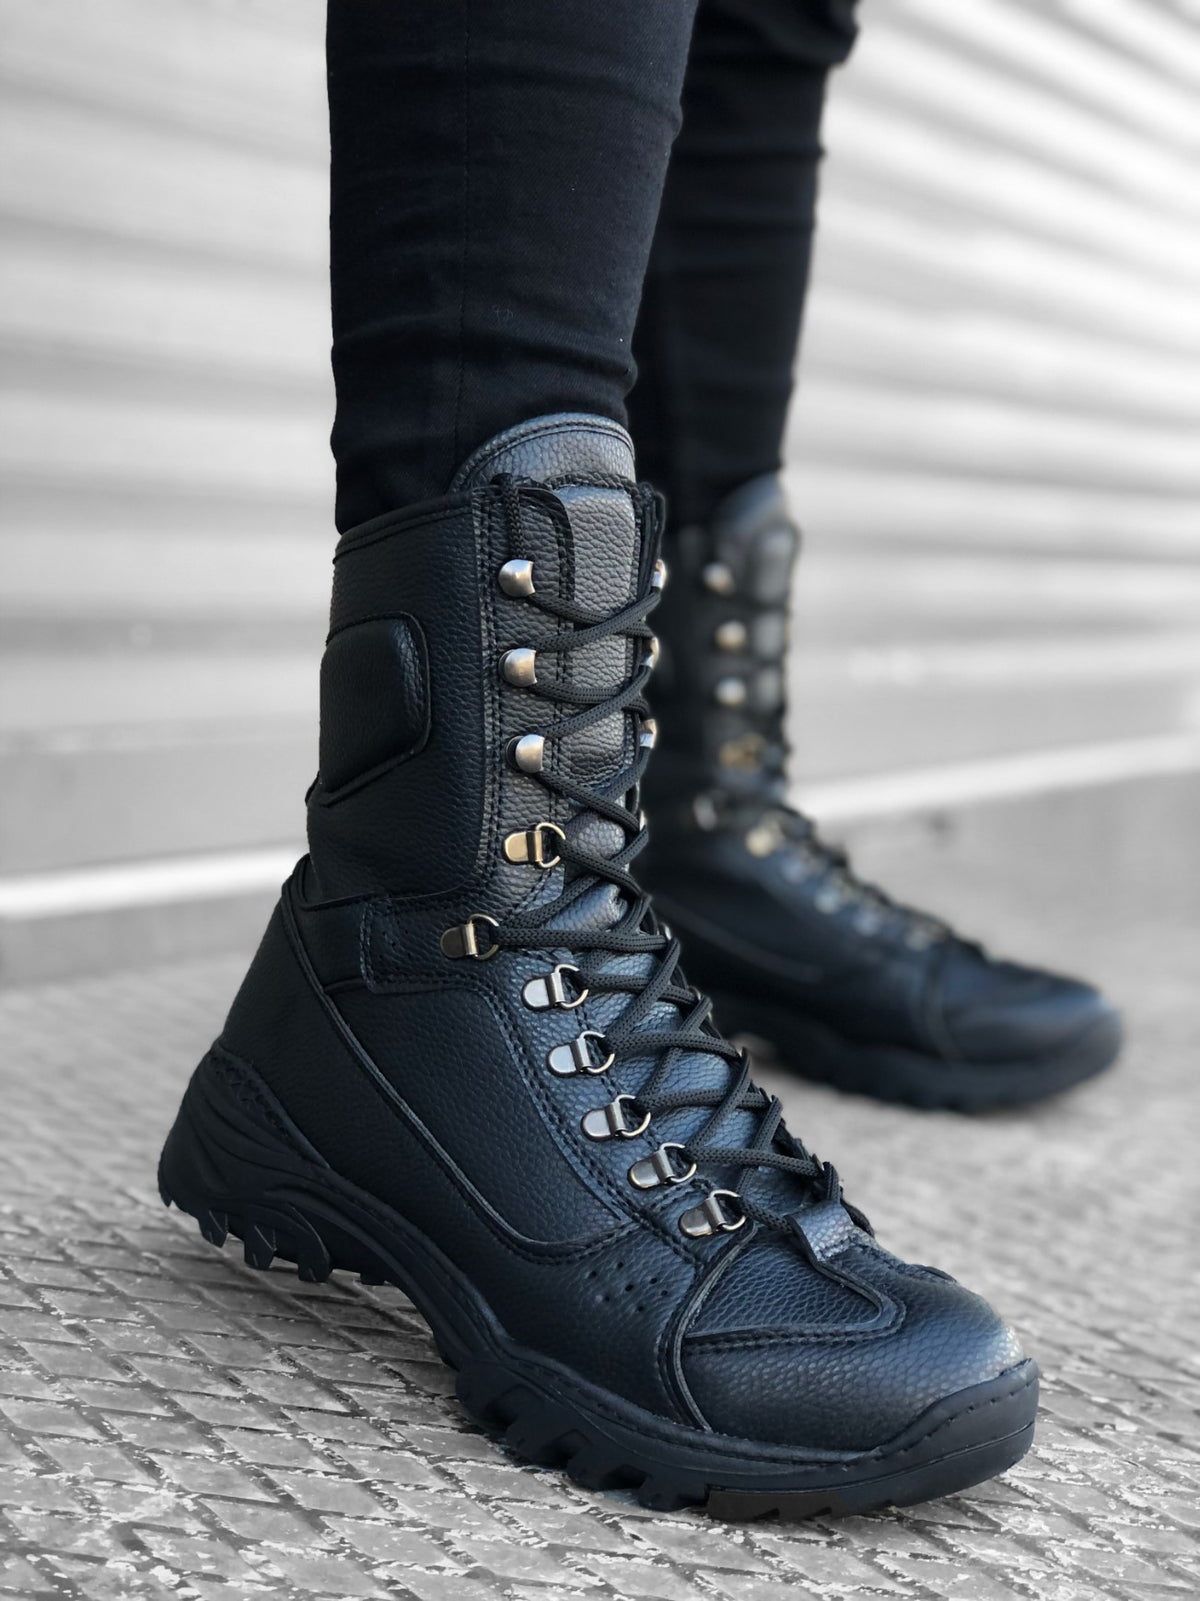 BA0605 Lace-up Black Skin Military Boots - STREETMODE™